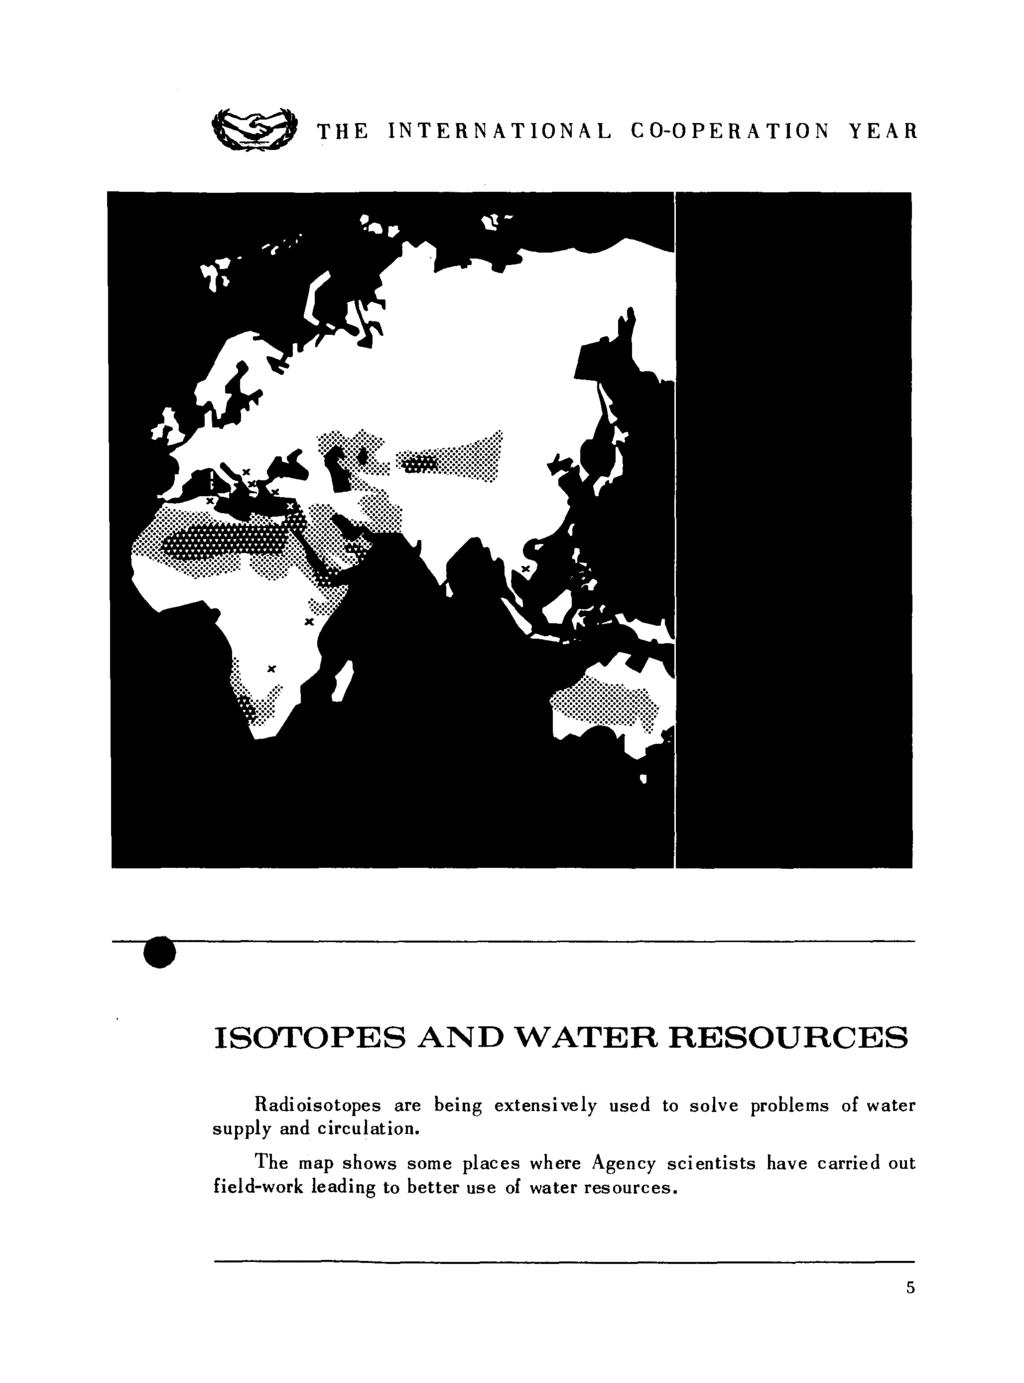 ISOTOPES AND WATER RESOURCES Radioisotopes are being extensively used to solve problems of water supply and circulation.